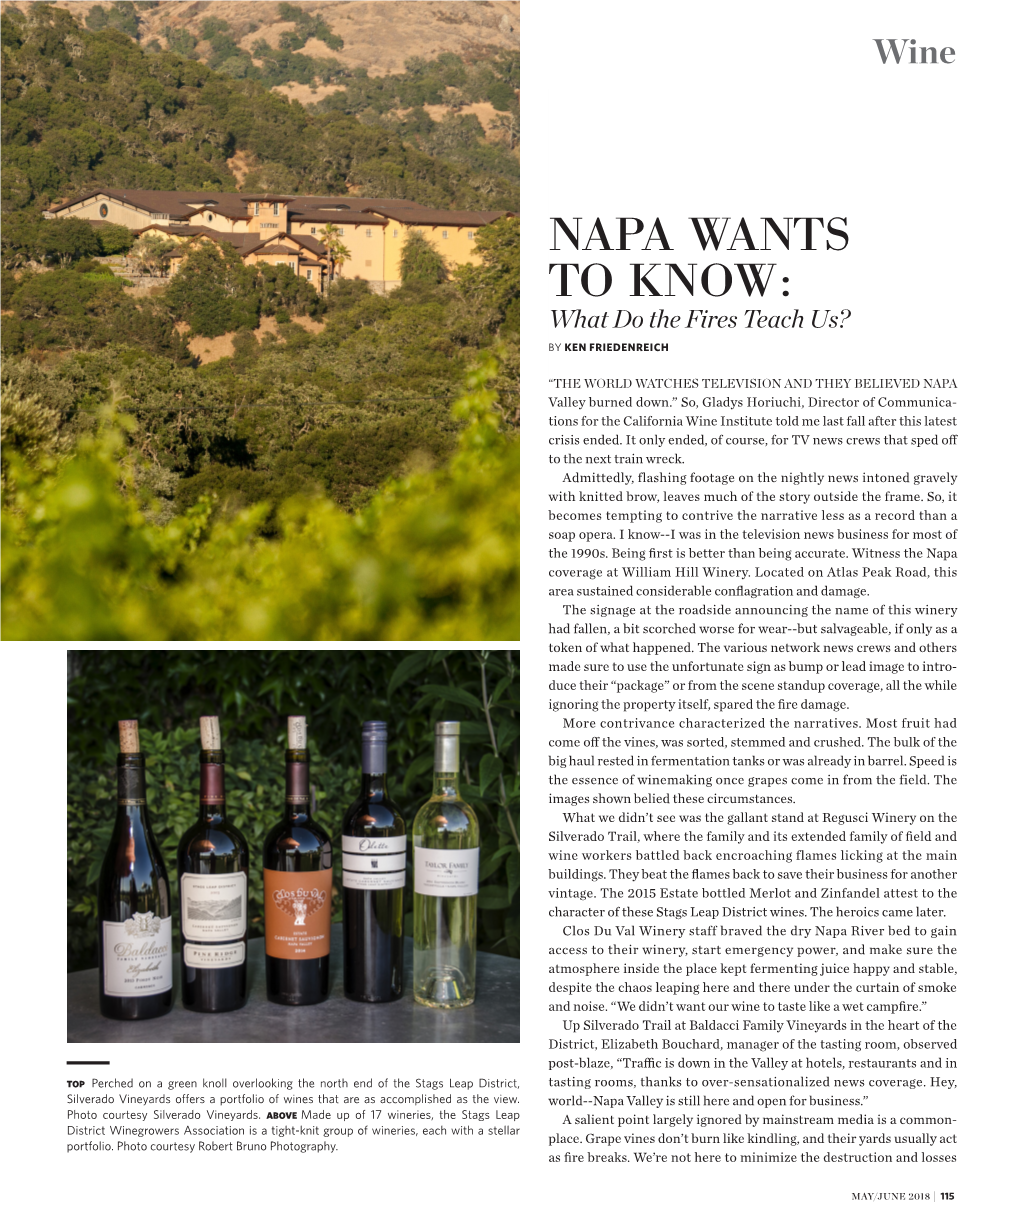 NAPA WANTS to KNOW: What Do the Fires Teach Us? by KEN FRIEDENREICH